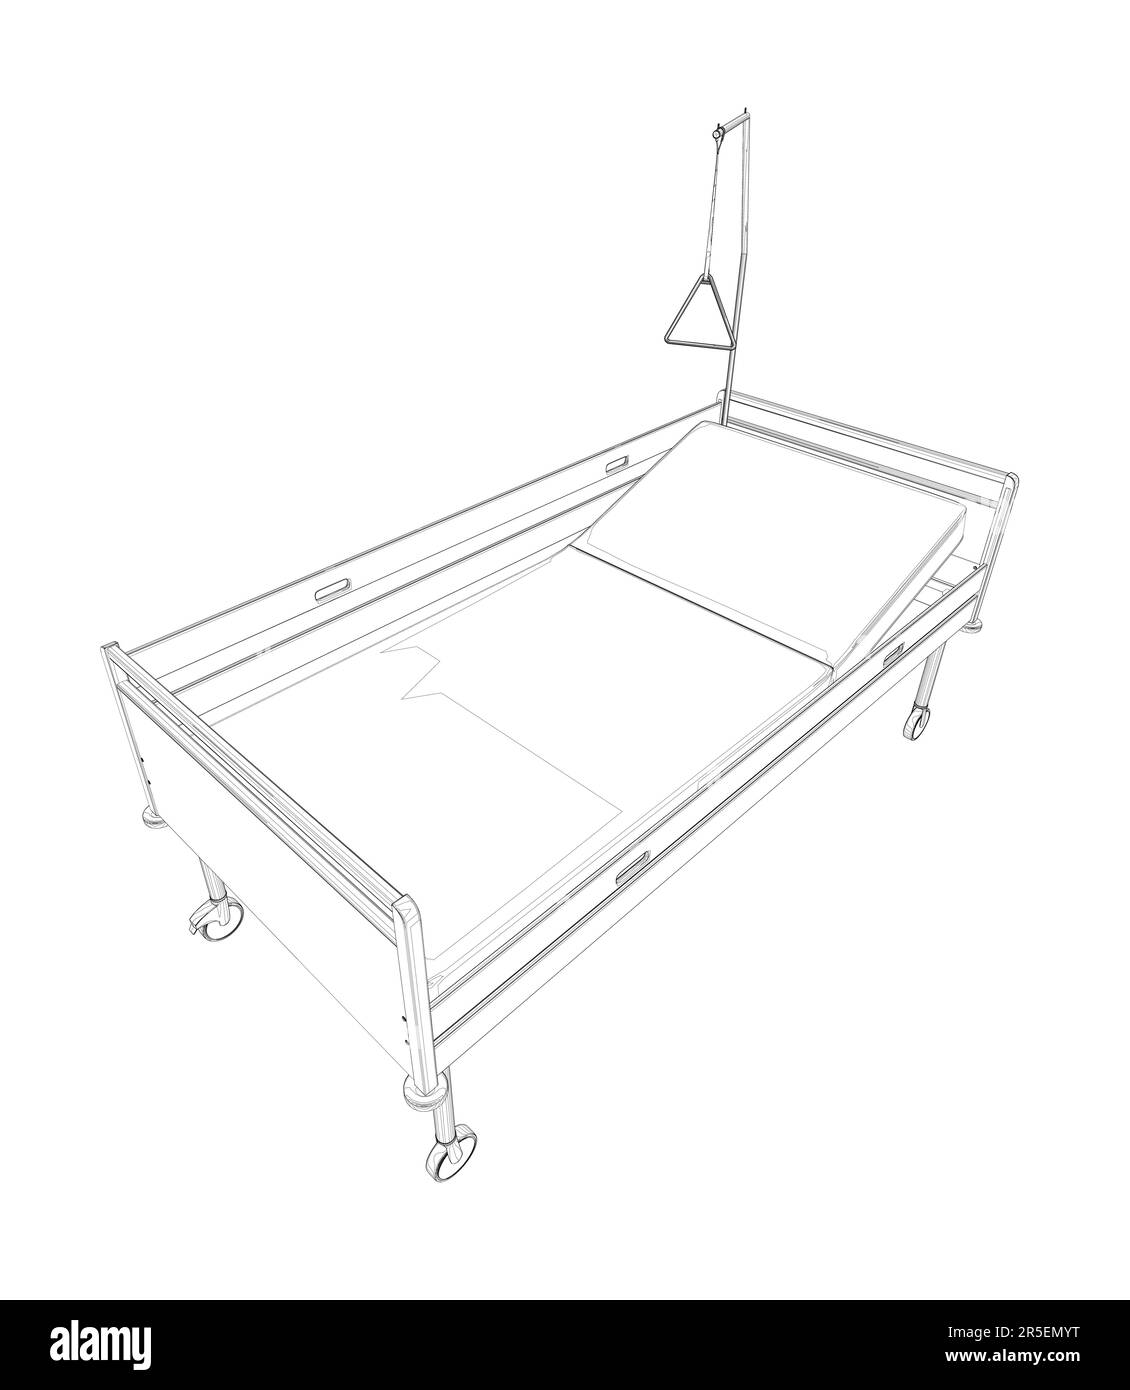 Outline of a hospital bed from black lines isolated on a white ...